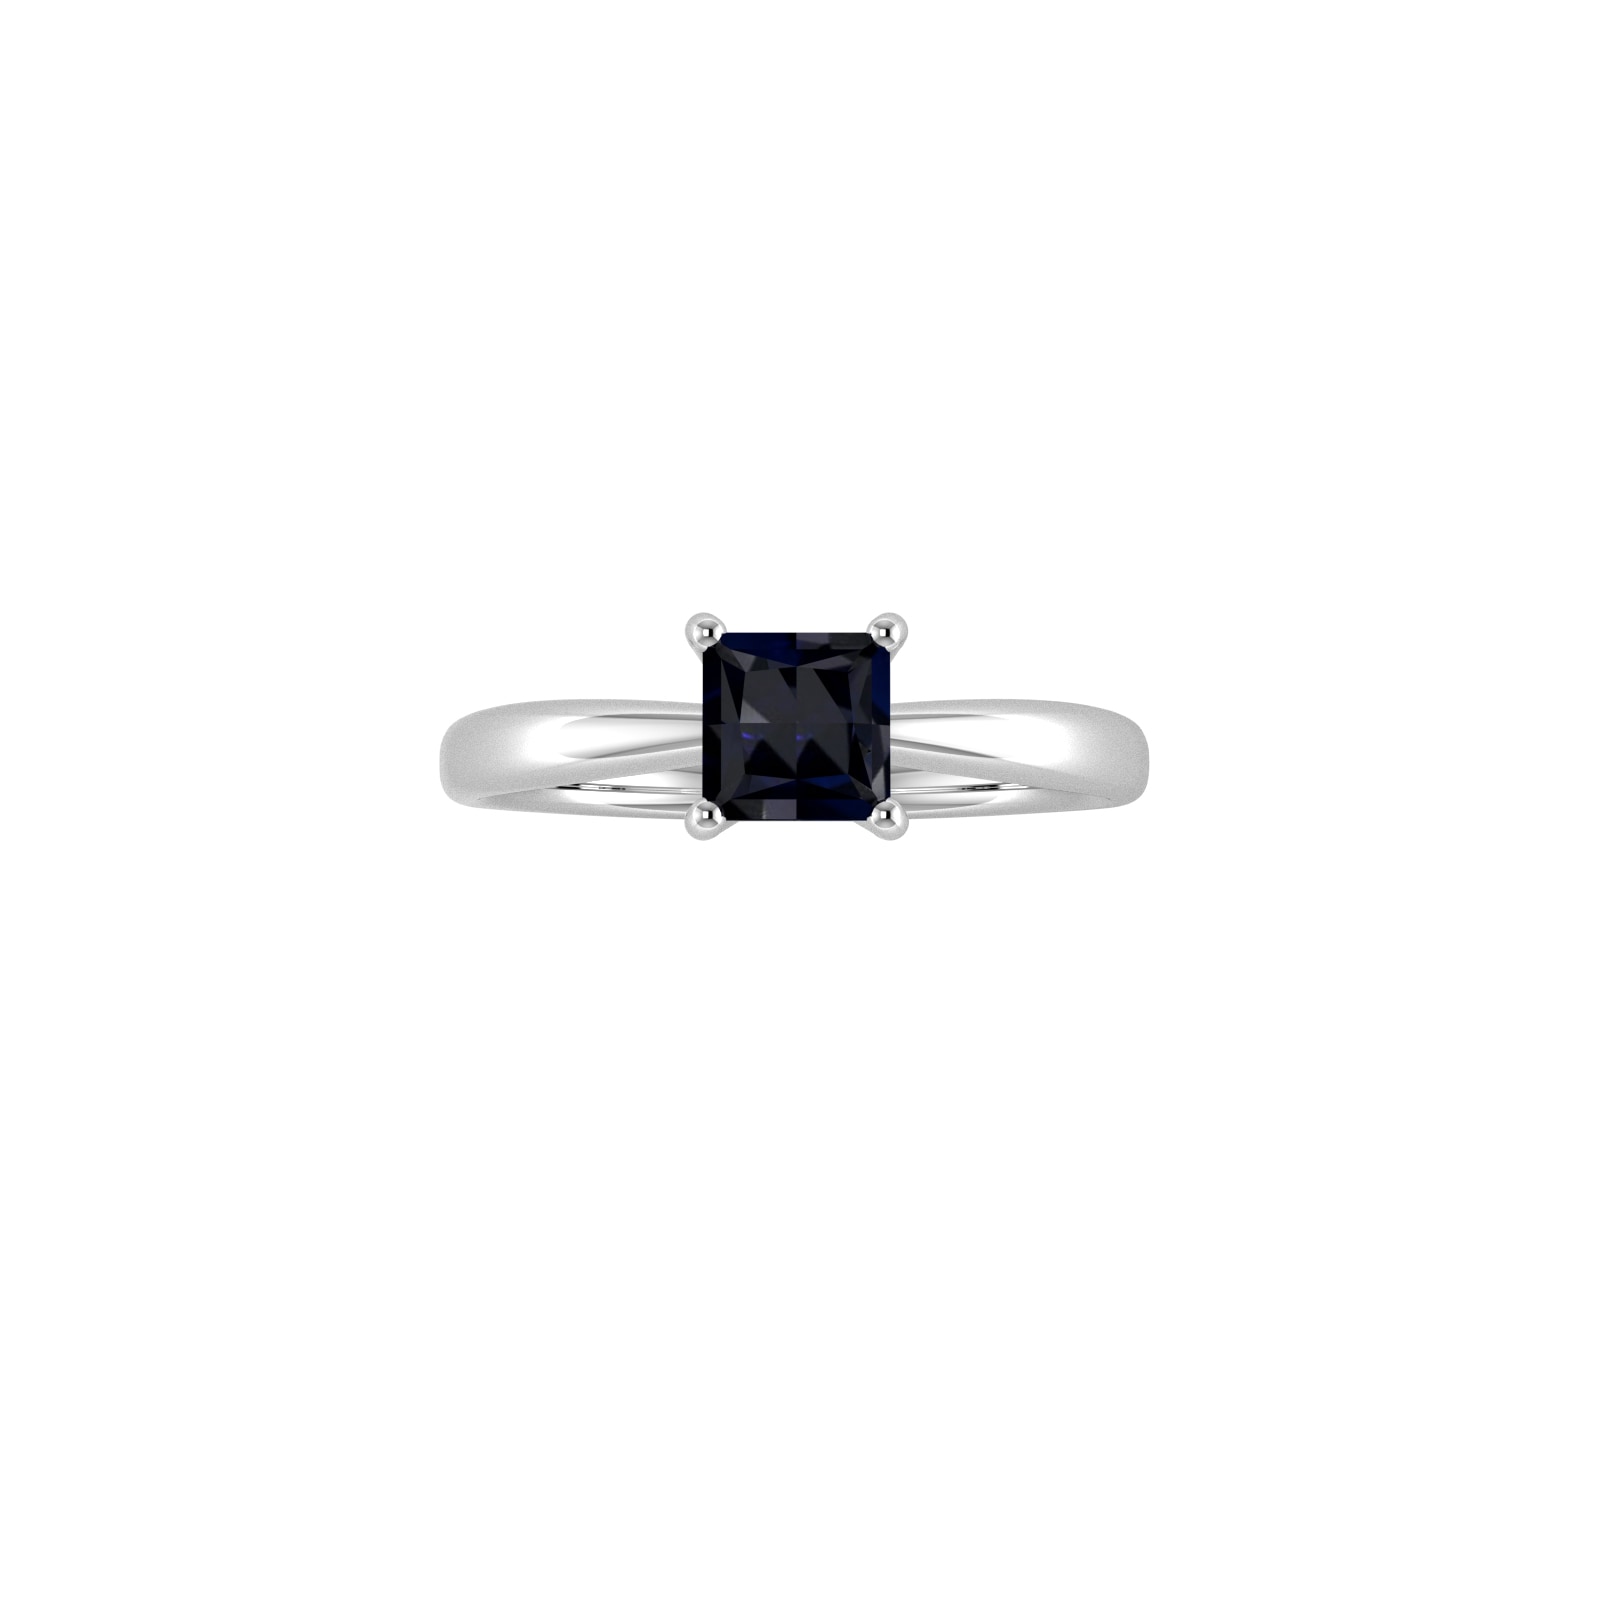 9ct White Gold 4 Claw Square Sapphire 5mm x 5mm Ring- Ring Size U